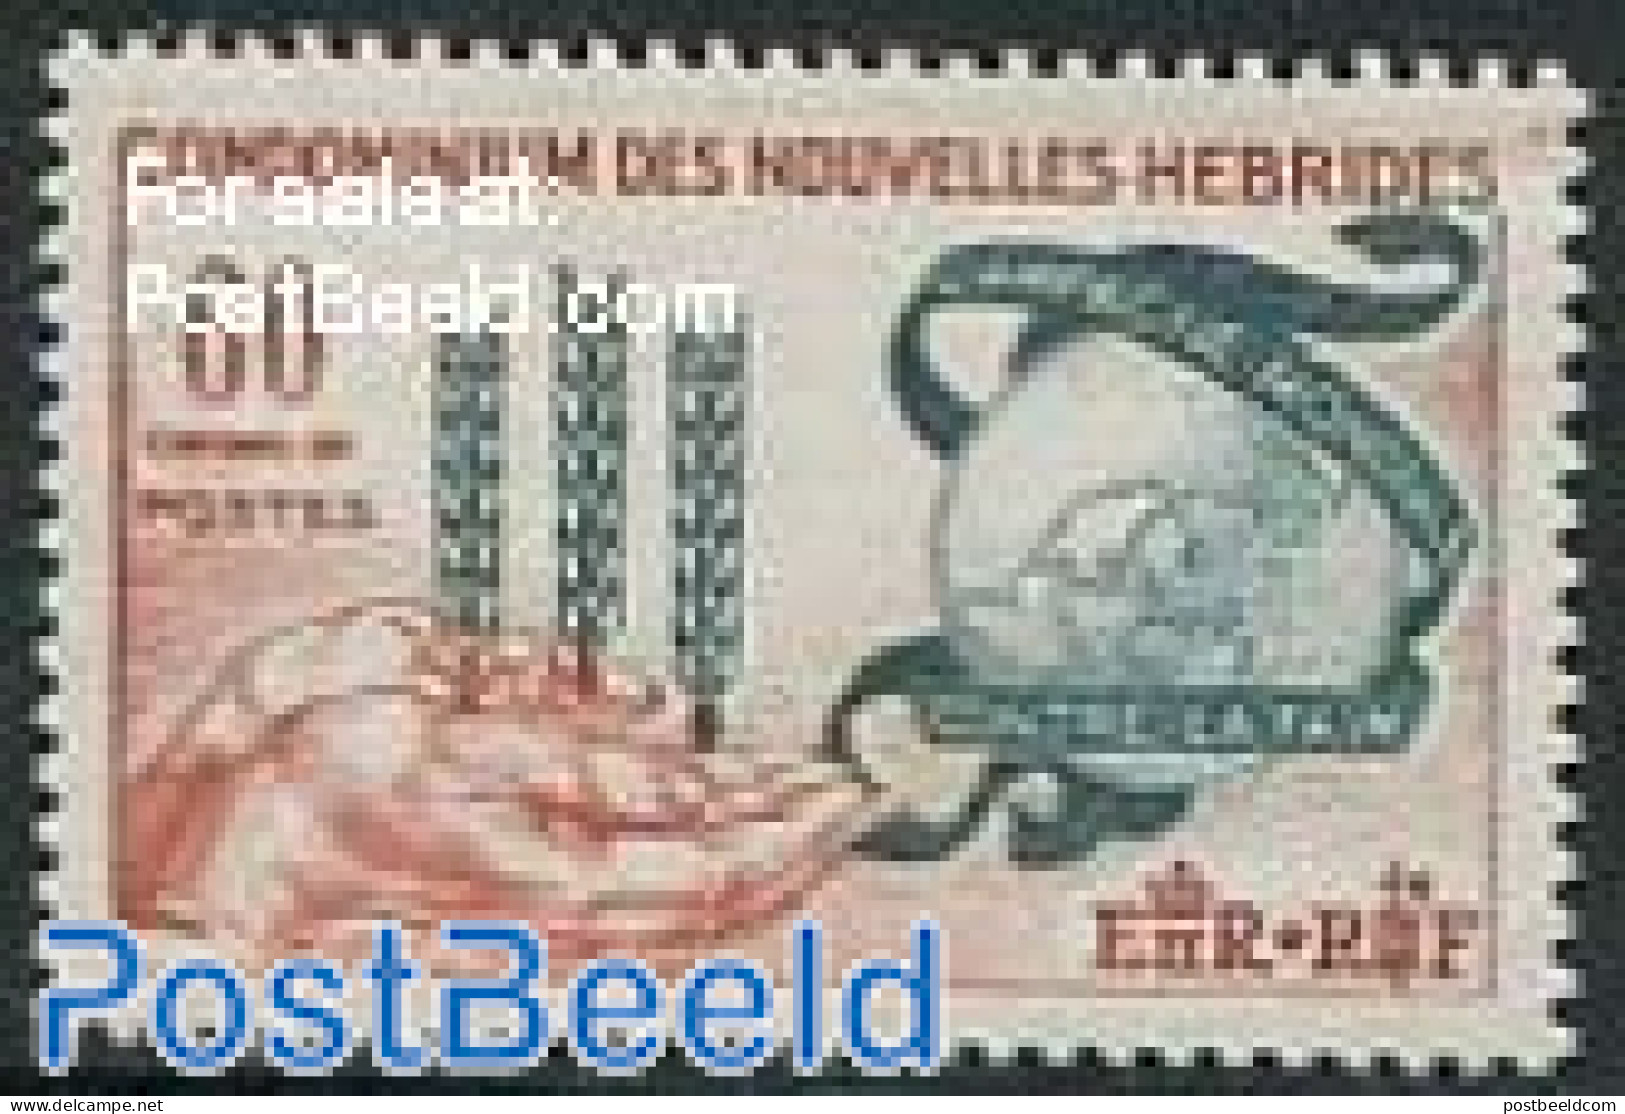 New Hebrides 1963 Freedom From Hunger 1v F, Unused (hinged), Health - Food & Drink - Freedom From Hunger 1963 - Ongebruikt